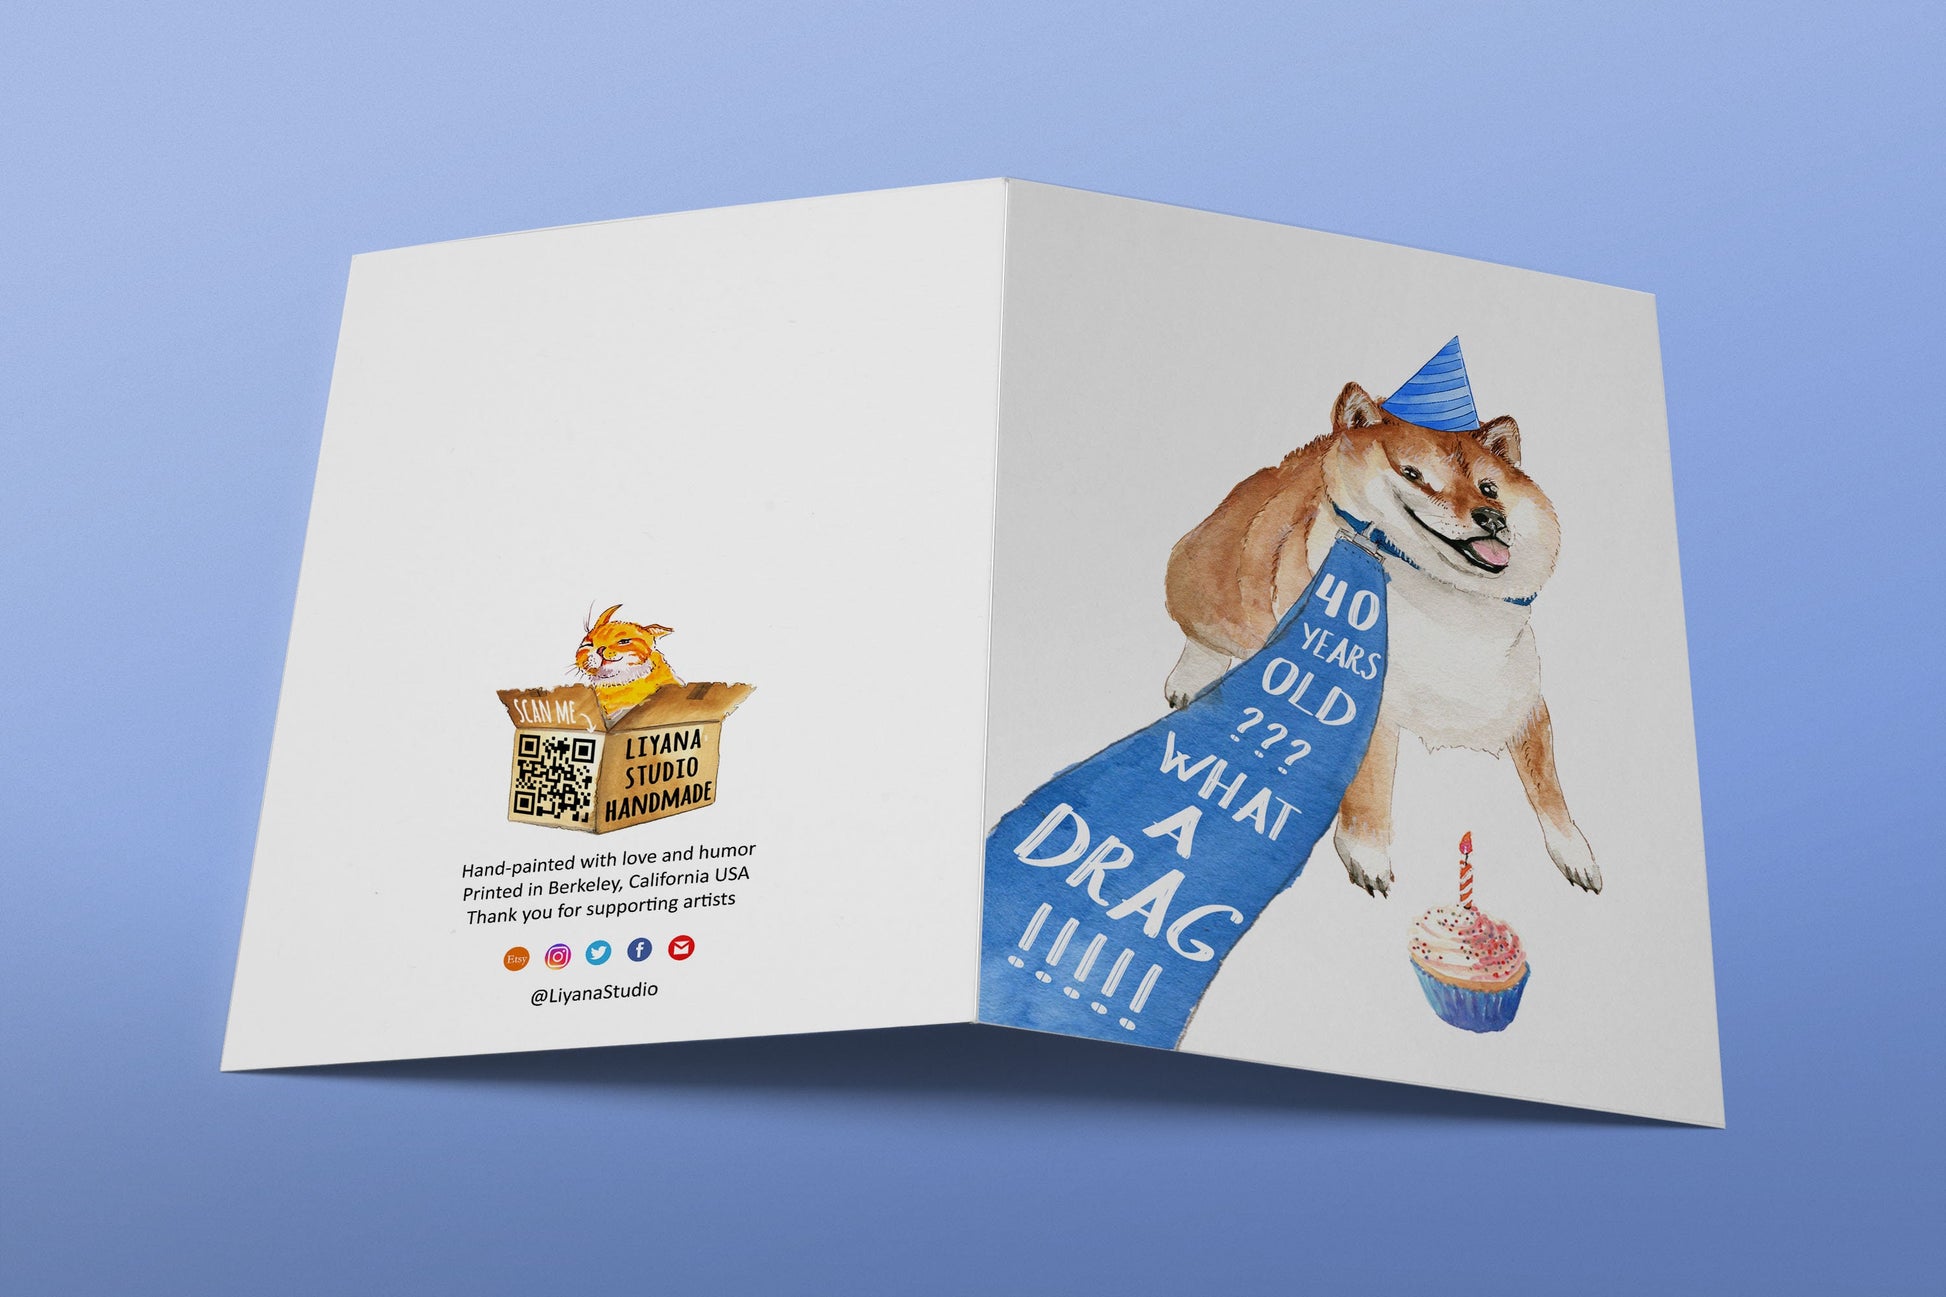 Doge Funny 40th Birthday Card For Best Friend - Shiba Inu Dog Birthday Cards For Men - Cute 40th Birthday Gift For Women